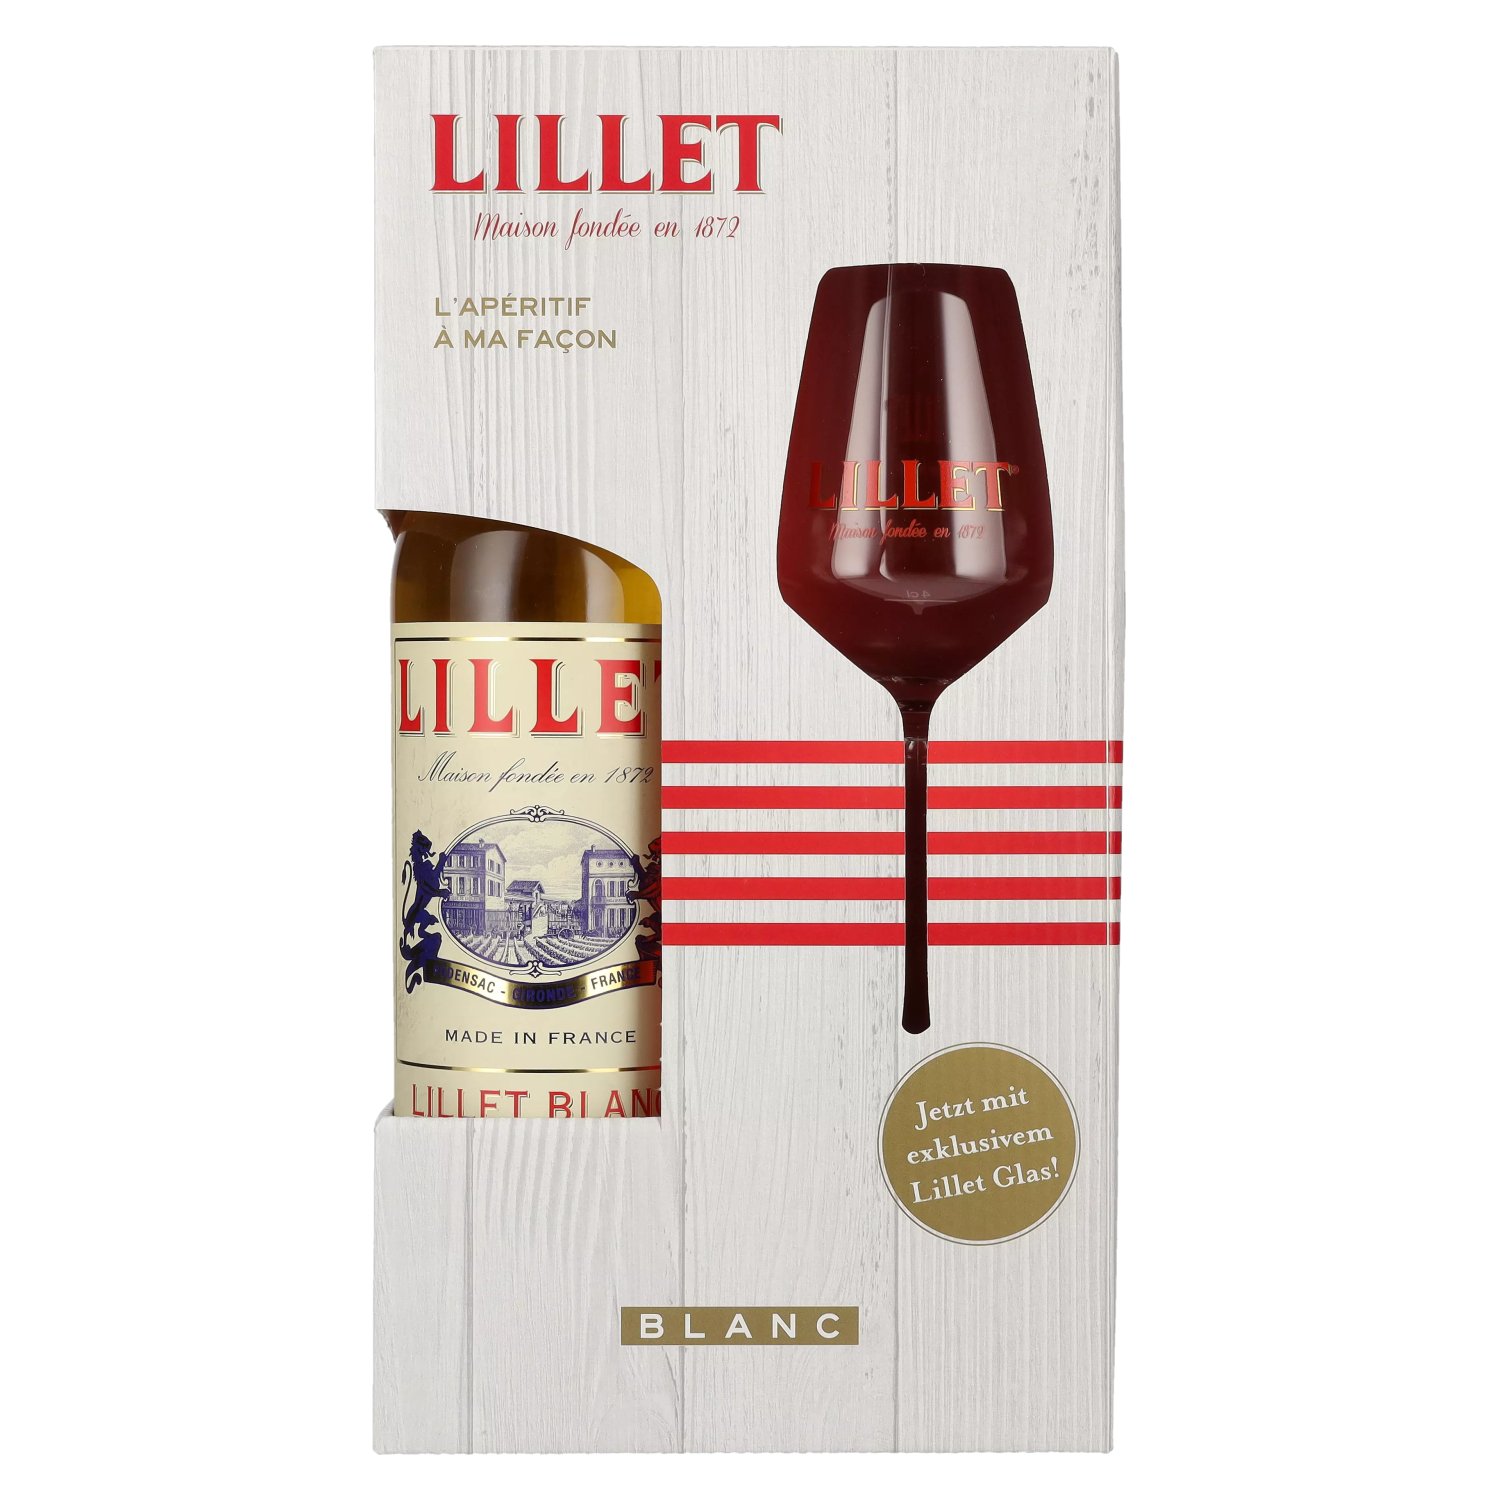 Lillet Blanc 17% 0,75l with glass Vol. Giftbox in